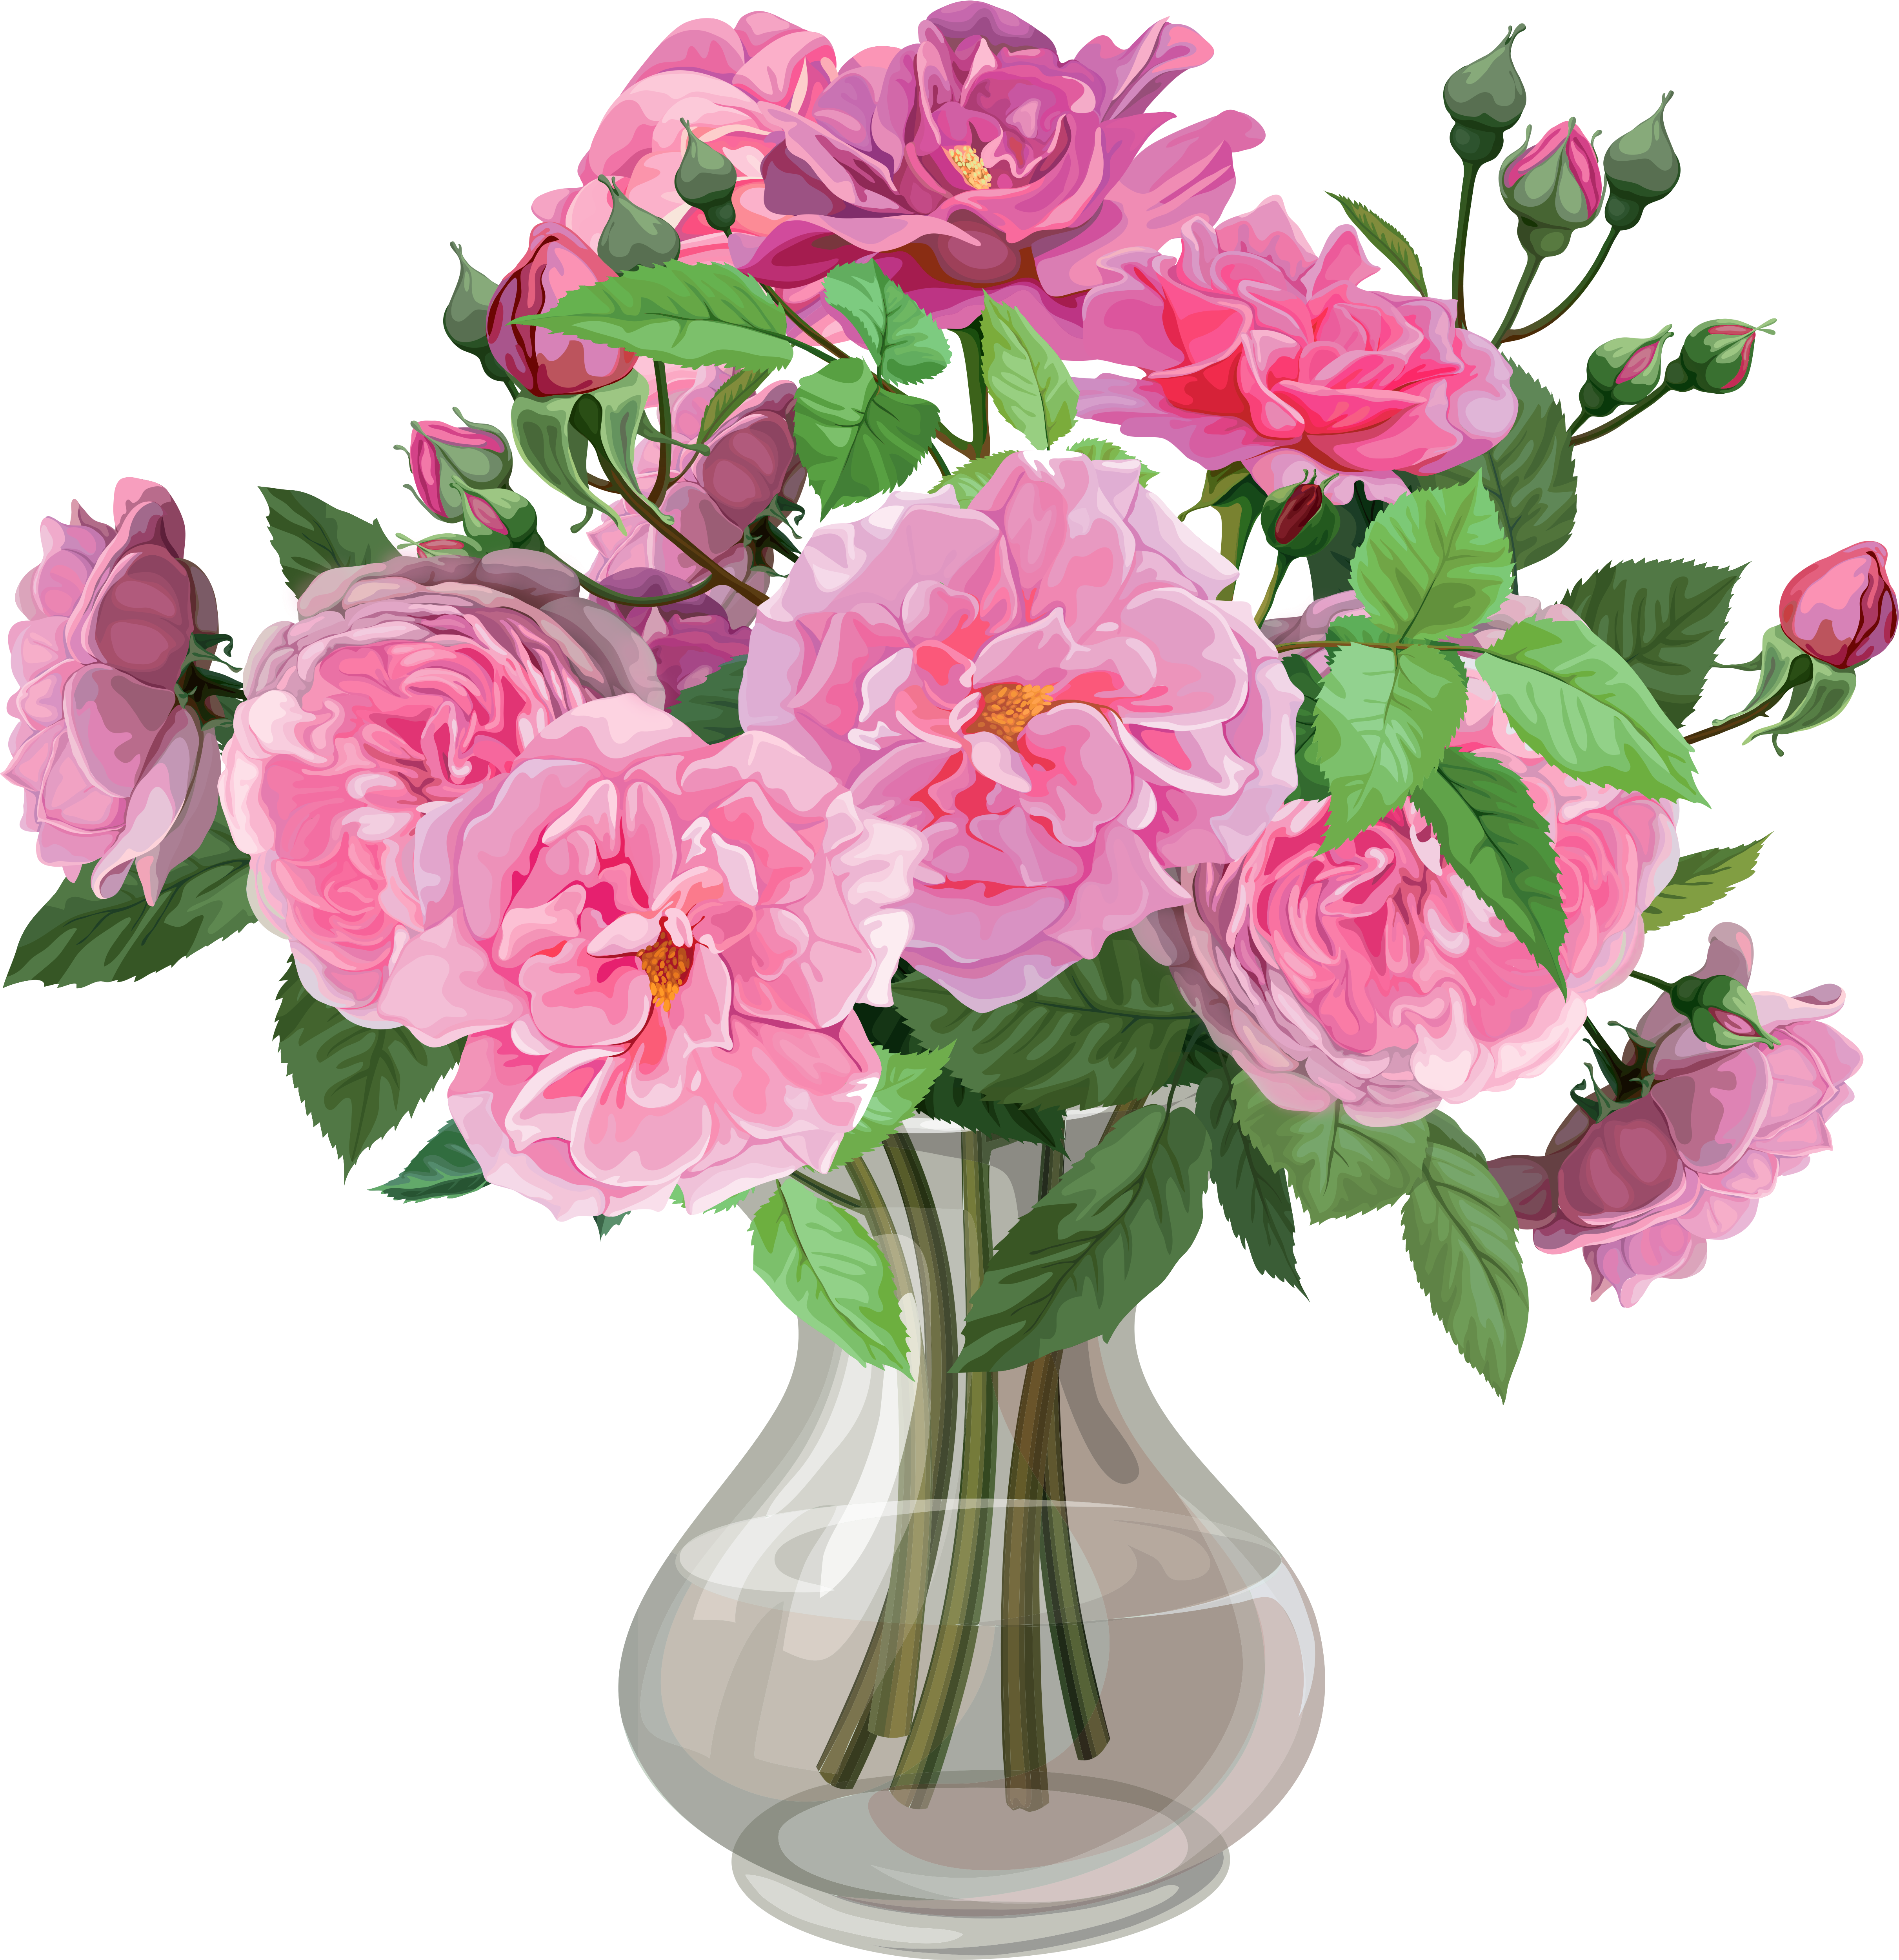 A Vase Of Pink Flowers